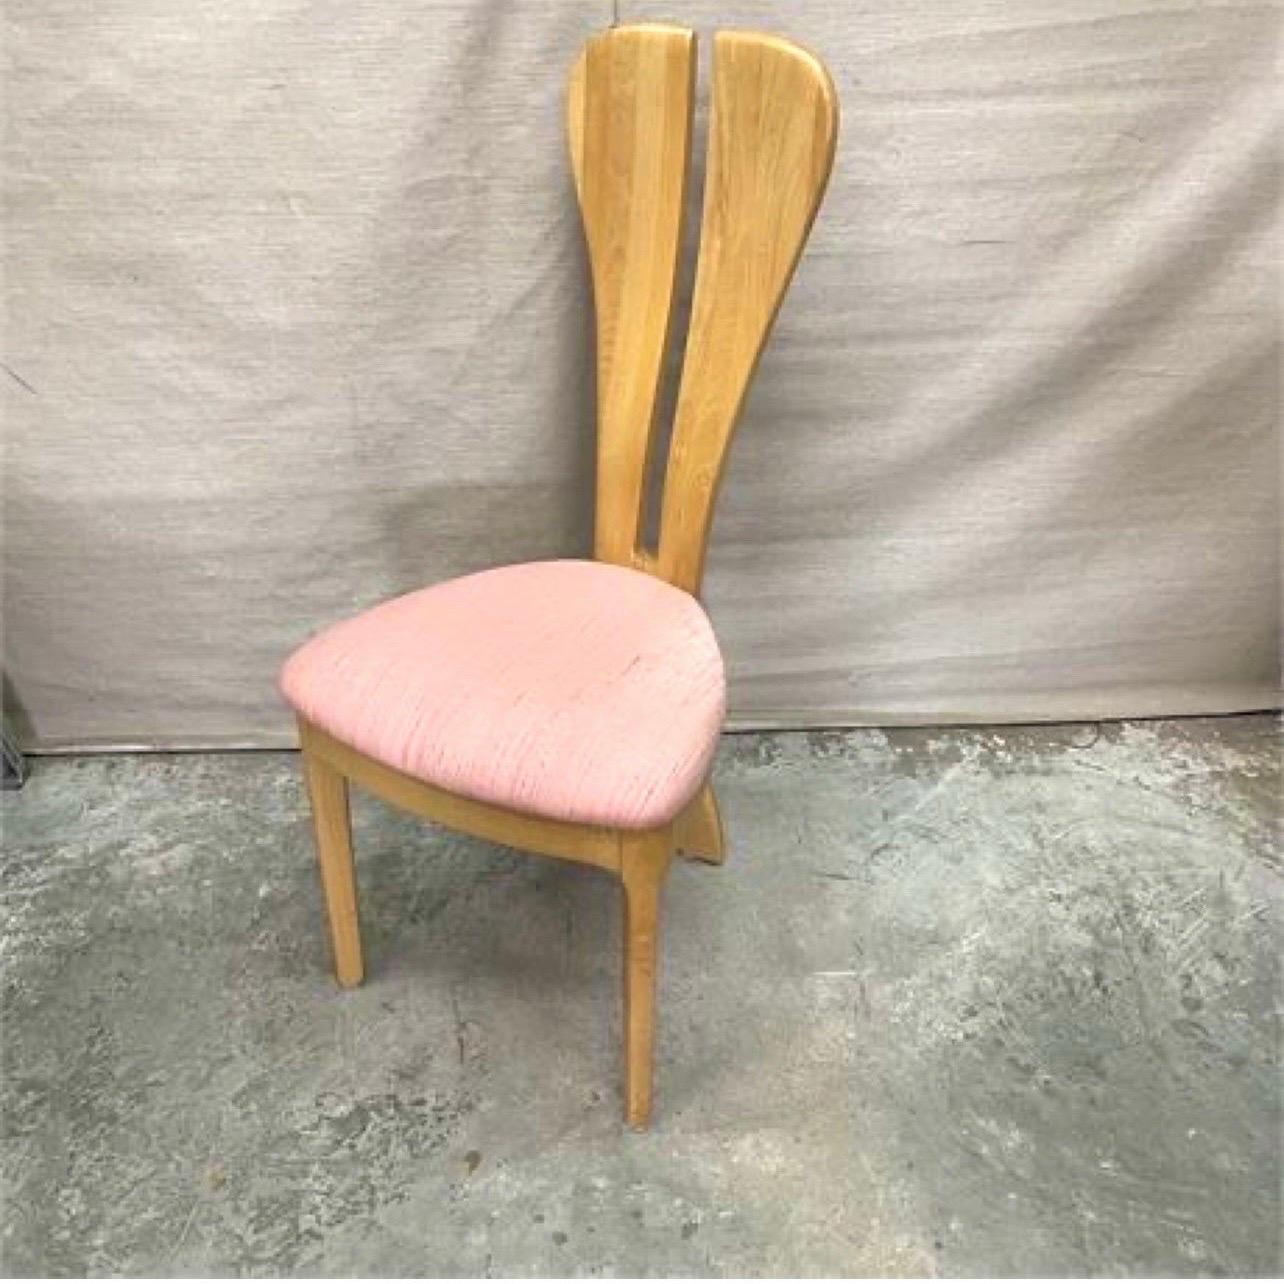 This chair is so sexy that I think I could find a spot for it in any room of the house. And the fabric on the seat cushion is easy to change to fit your decor. (Because maybe pink is not your color?). This rabbit ear chair with the split back leg is